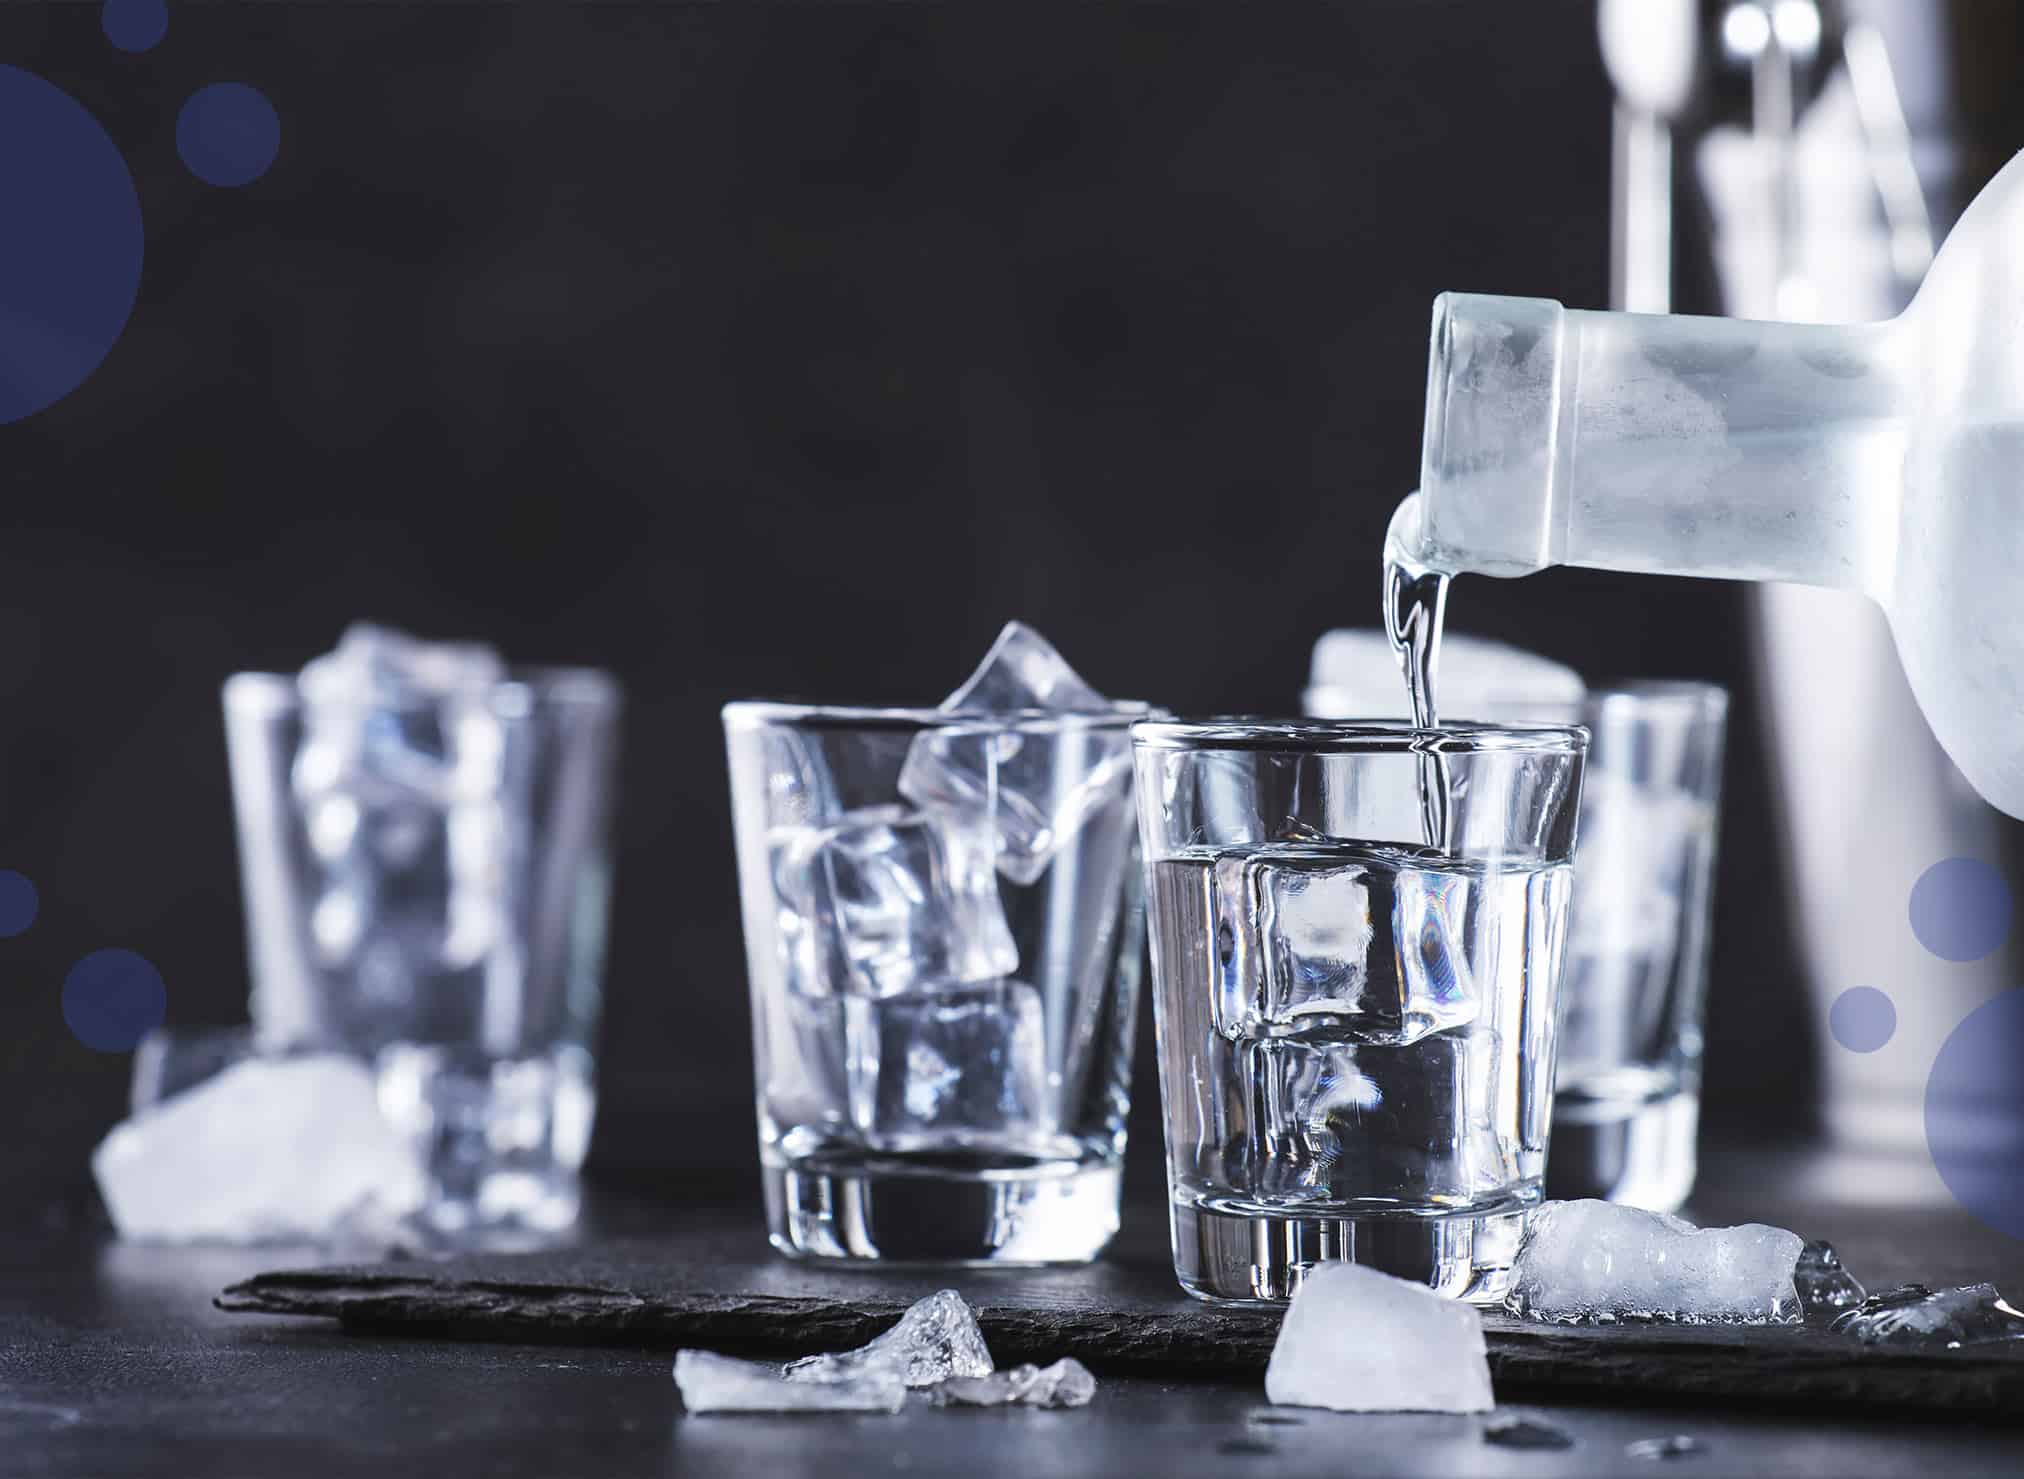 4 shot glasses being filled with ice cubes and chilled vodka on a black stone plate placed on a black table in front of a black background.